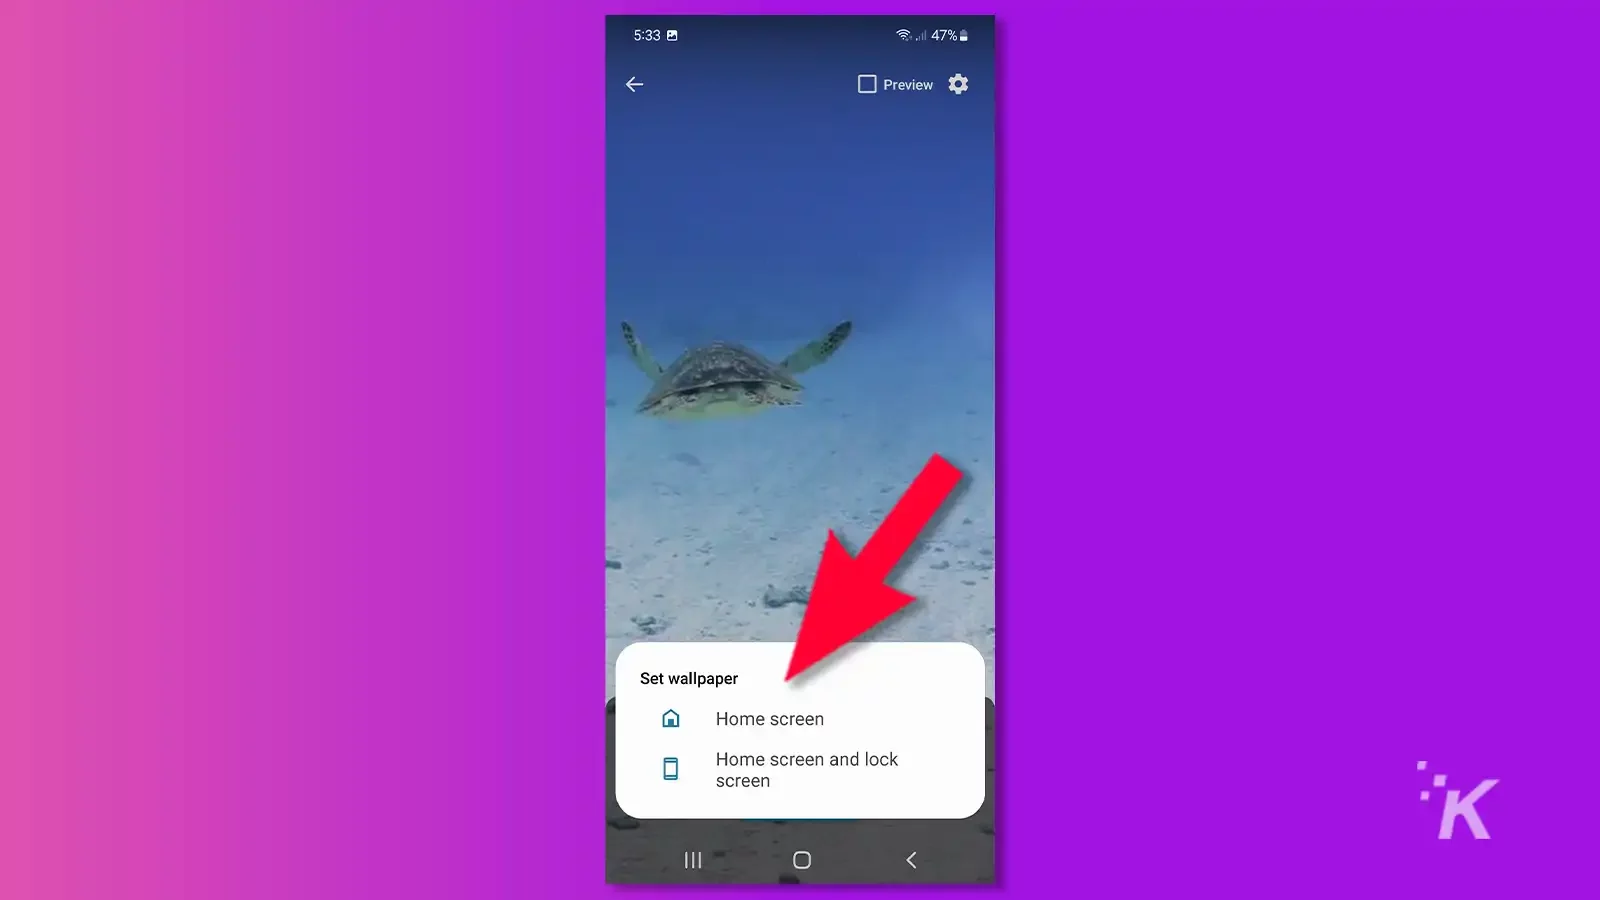 Video to Wallpaper with arrow pointing to Home screen